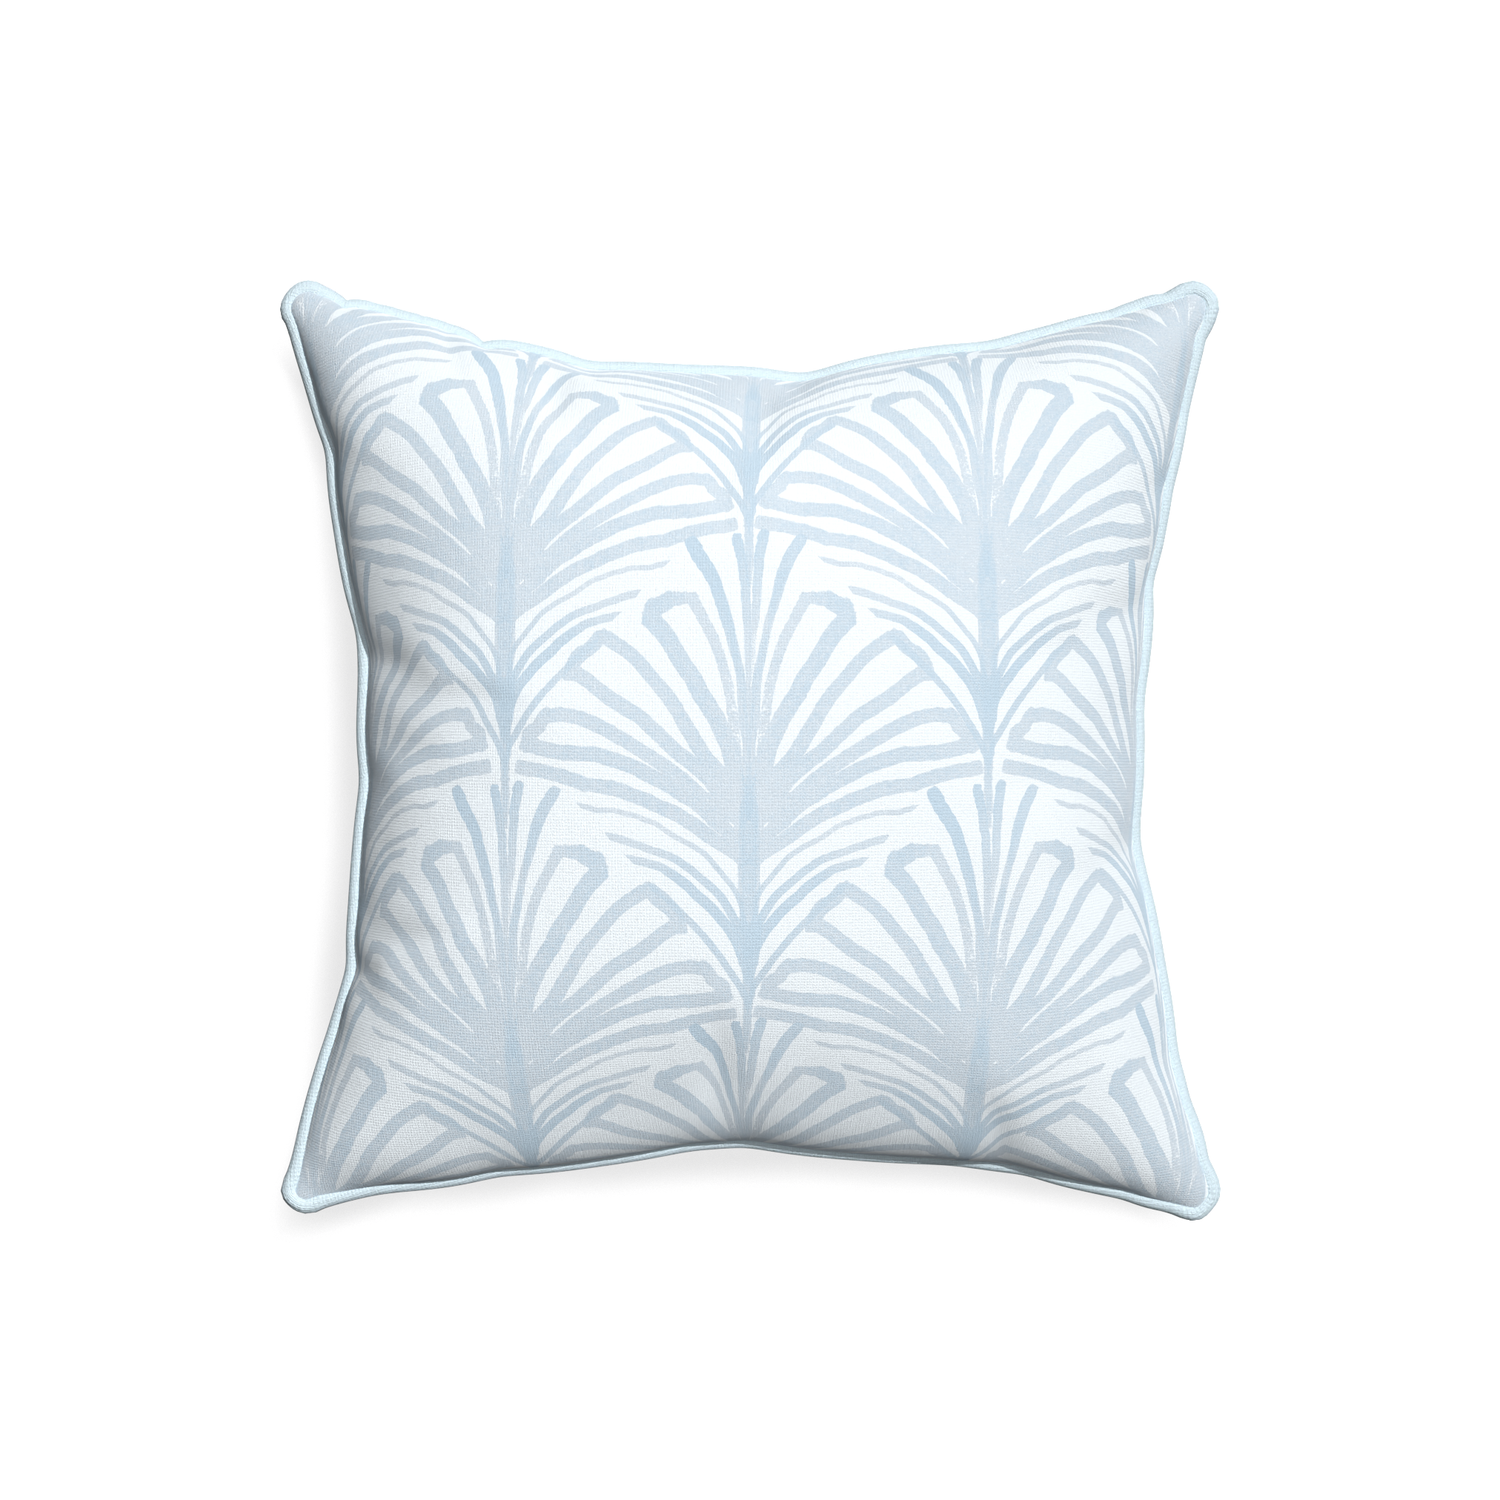 20-square suzy sky custom pillow with powder piping on white background